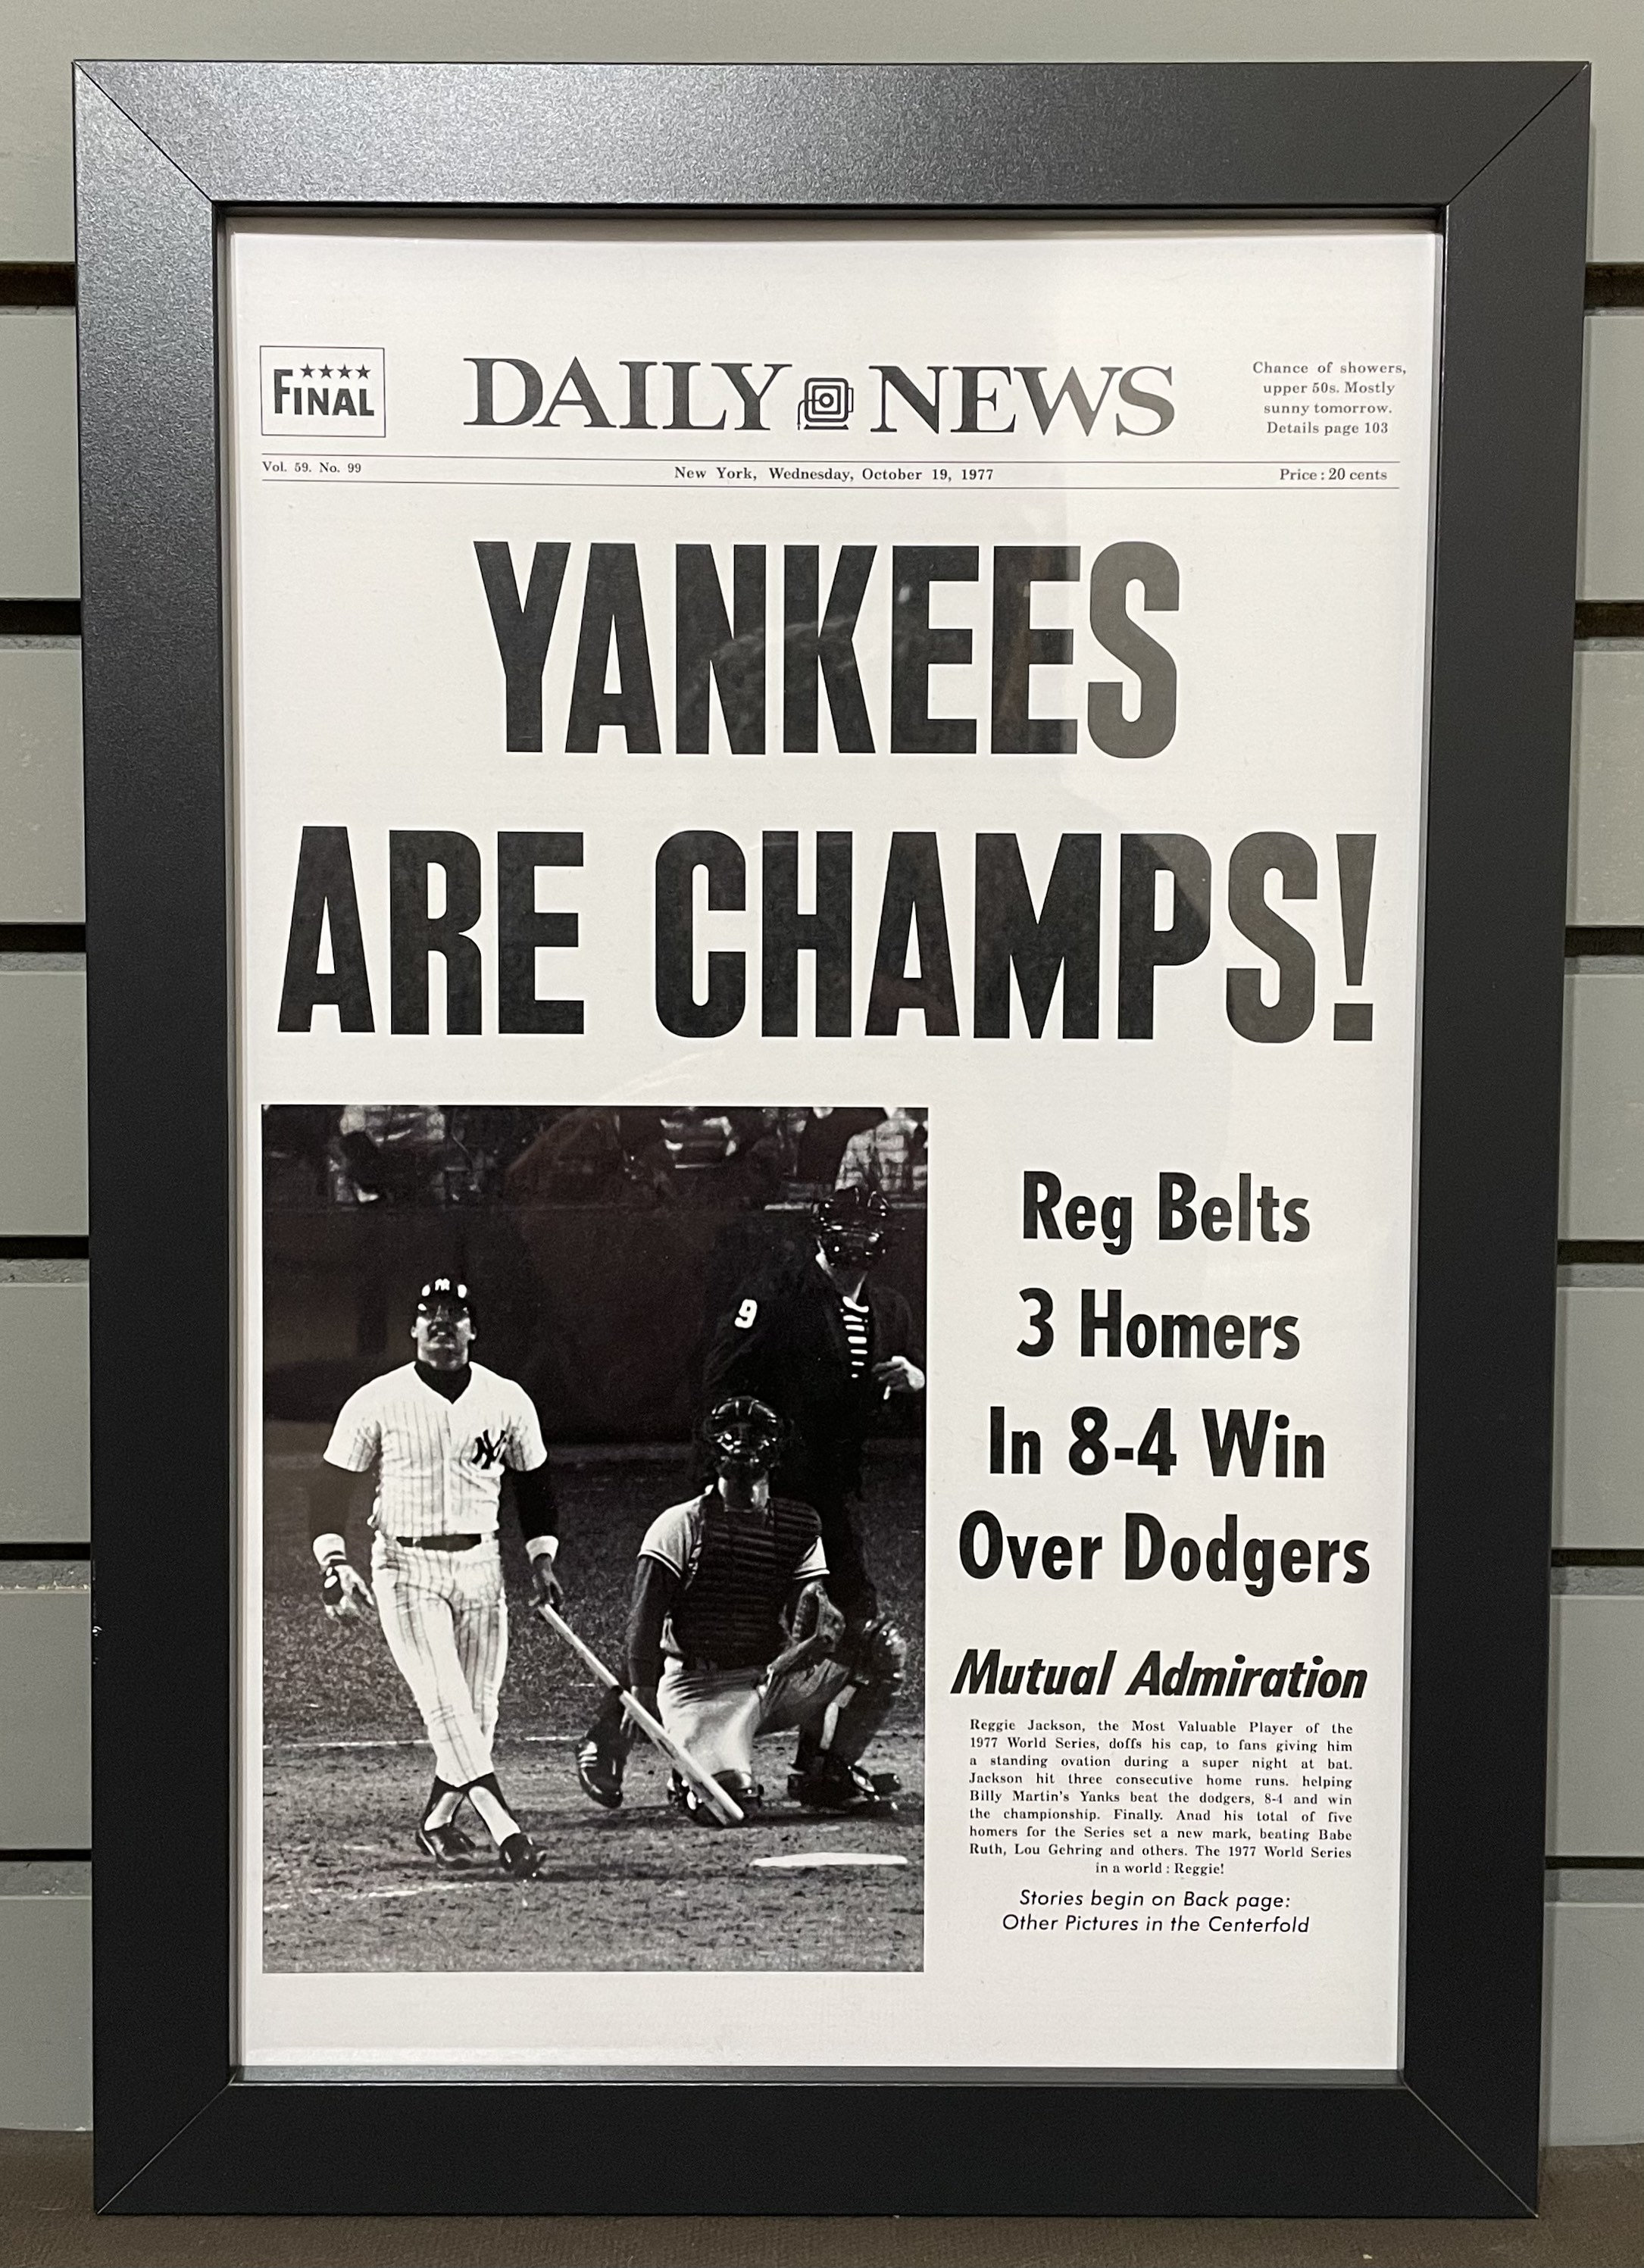 1977 New York Yankees World Series Champions Framed Front Page 